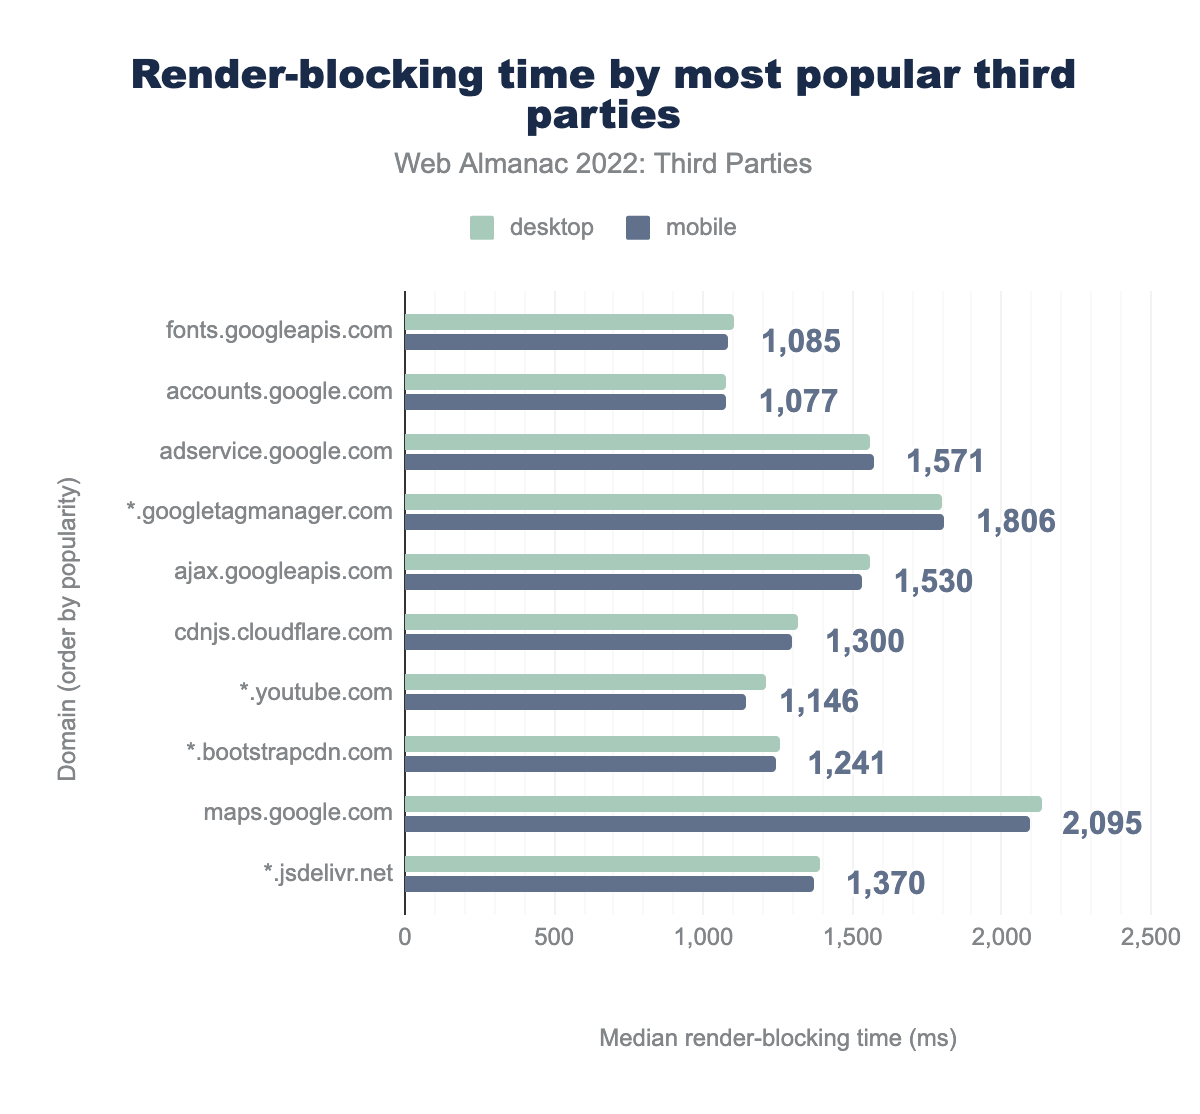 Median render-blocking time for top 10 most popular third parties.